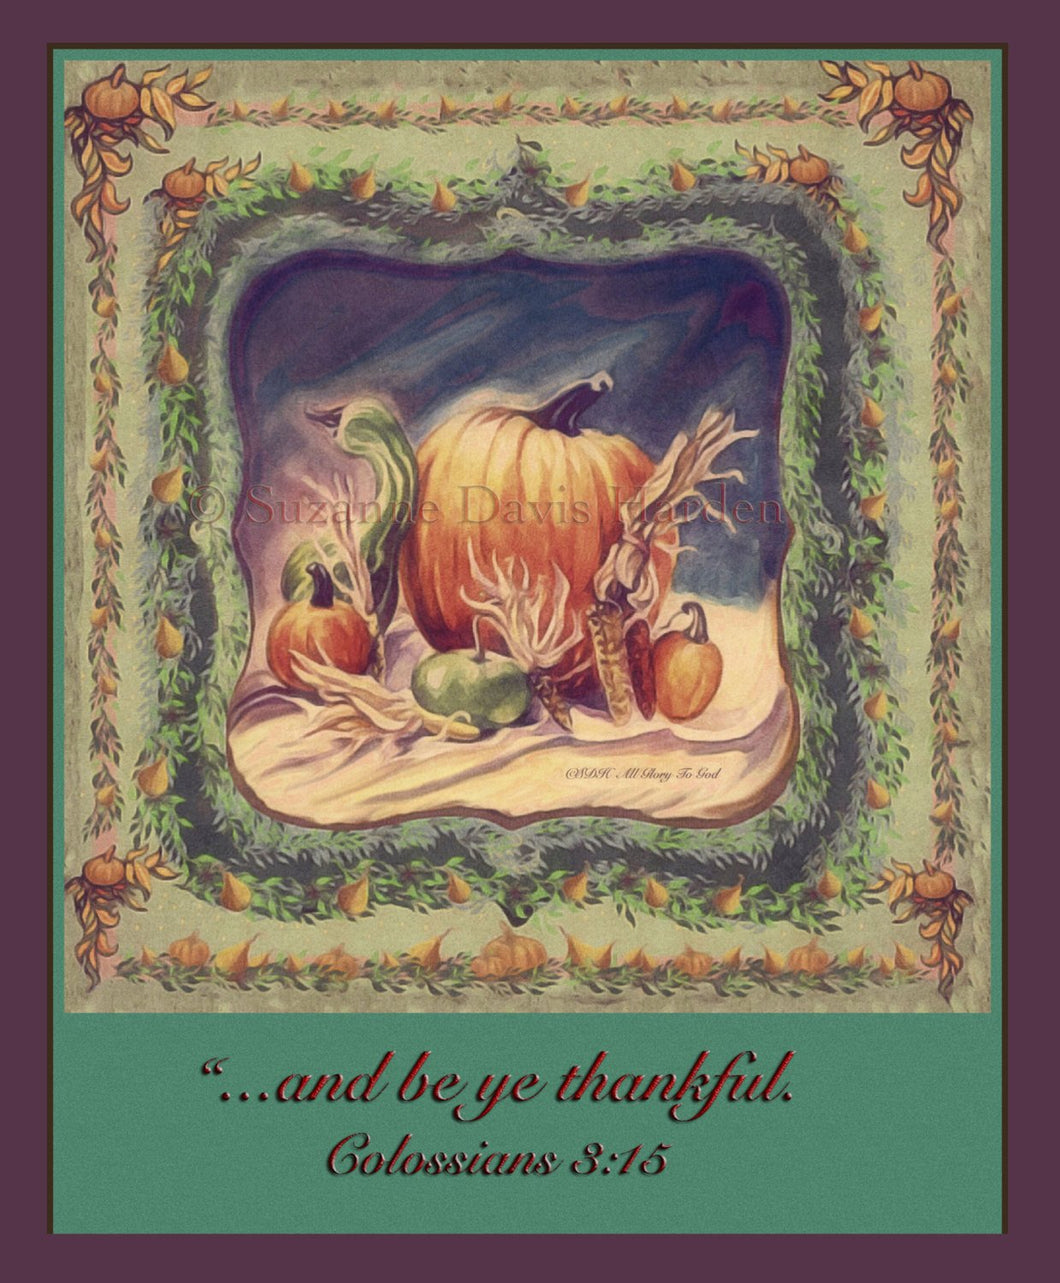 Thank You/Encouraging Greeting Card illustrated by Suzanne Davis Harden